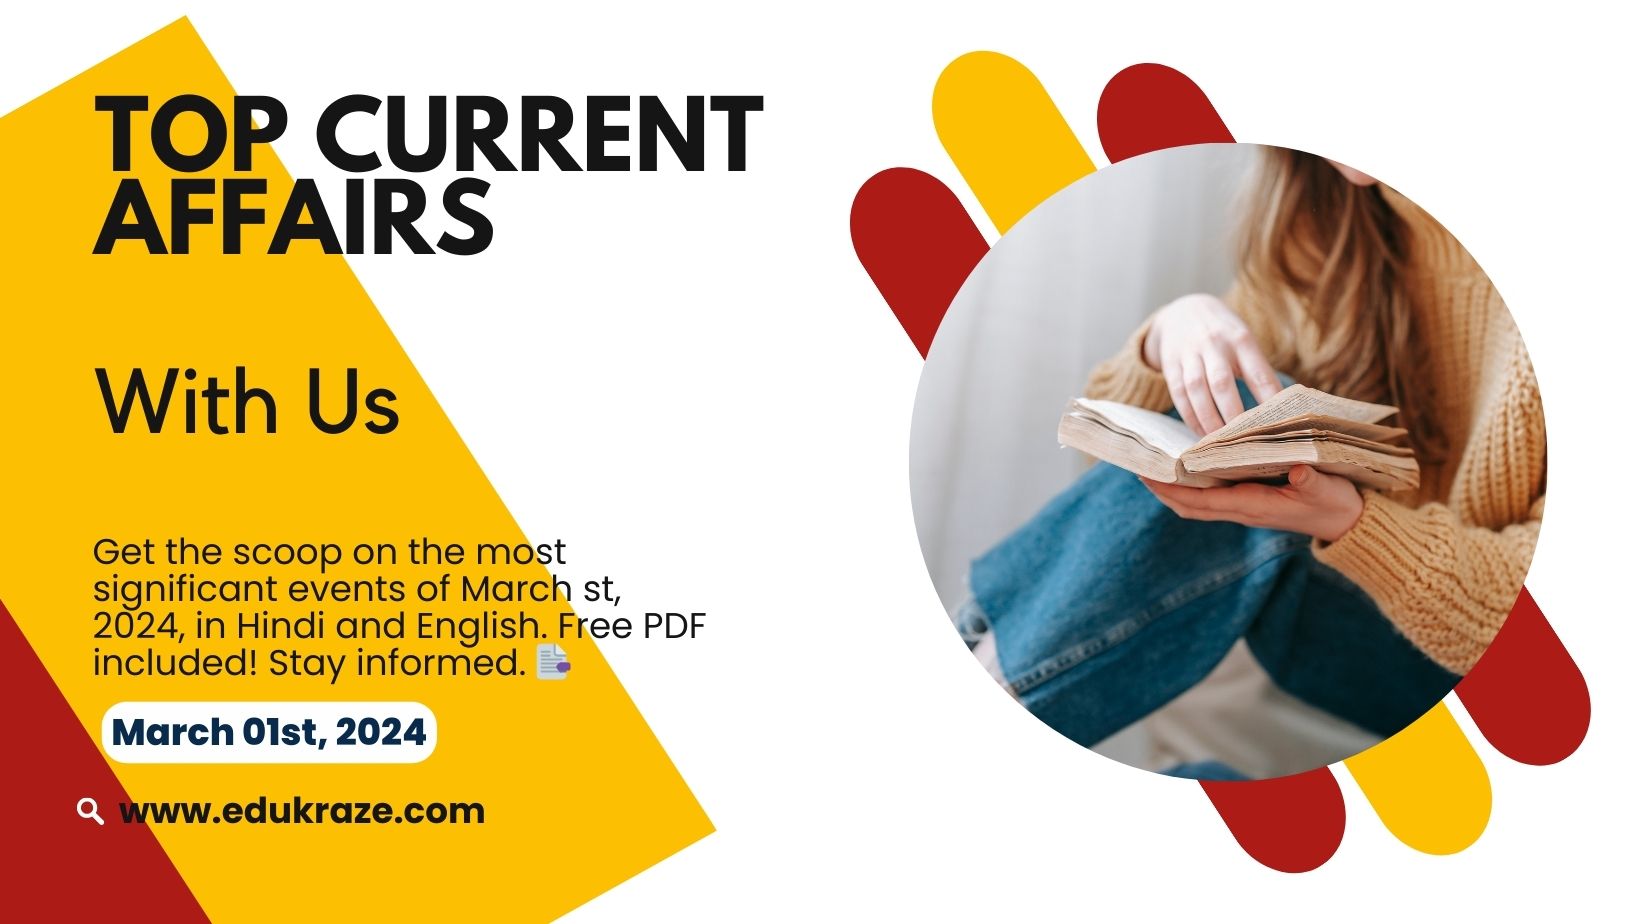 Today’s Top Current Affairs March 1st, 2024 | Hindi and English with Free PDF